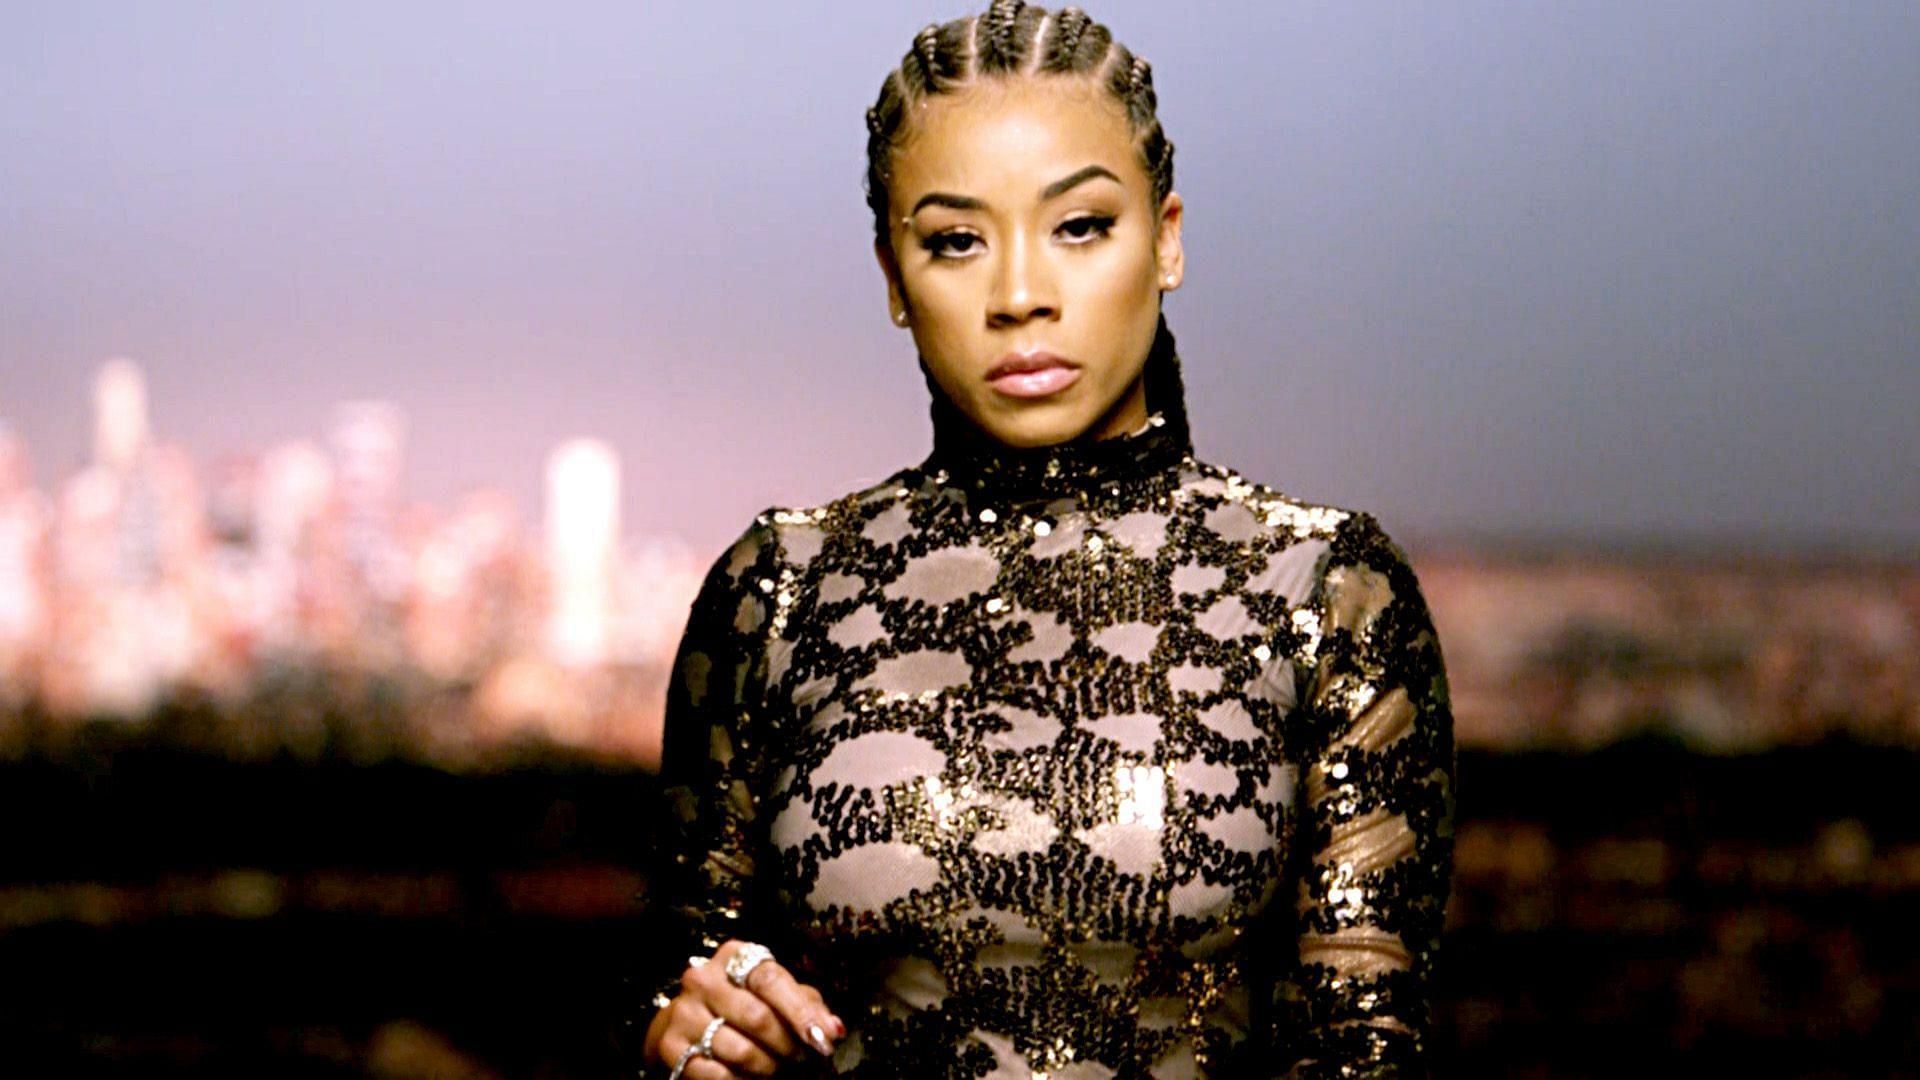 Keyshia Cole's Father, Leon Cole, Dies From COVID-19 Complications